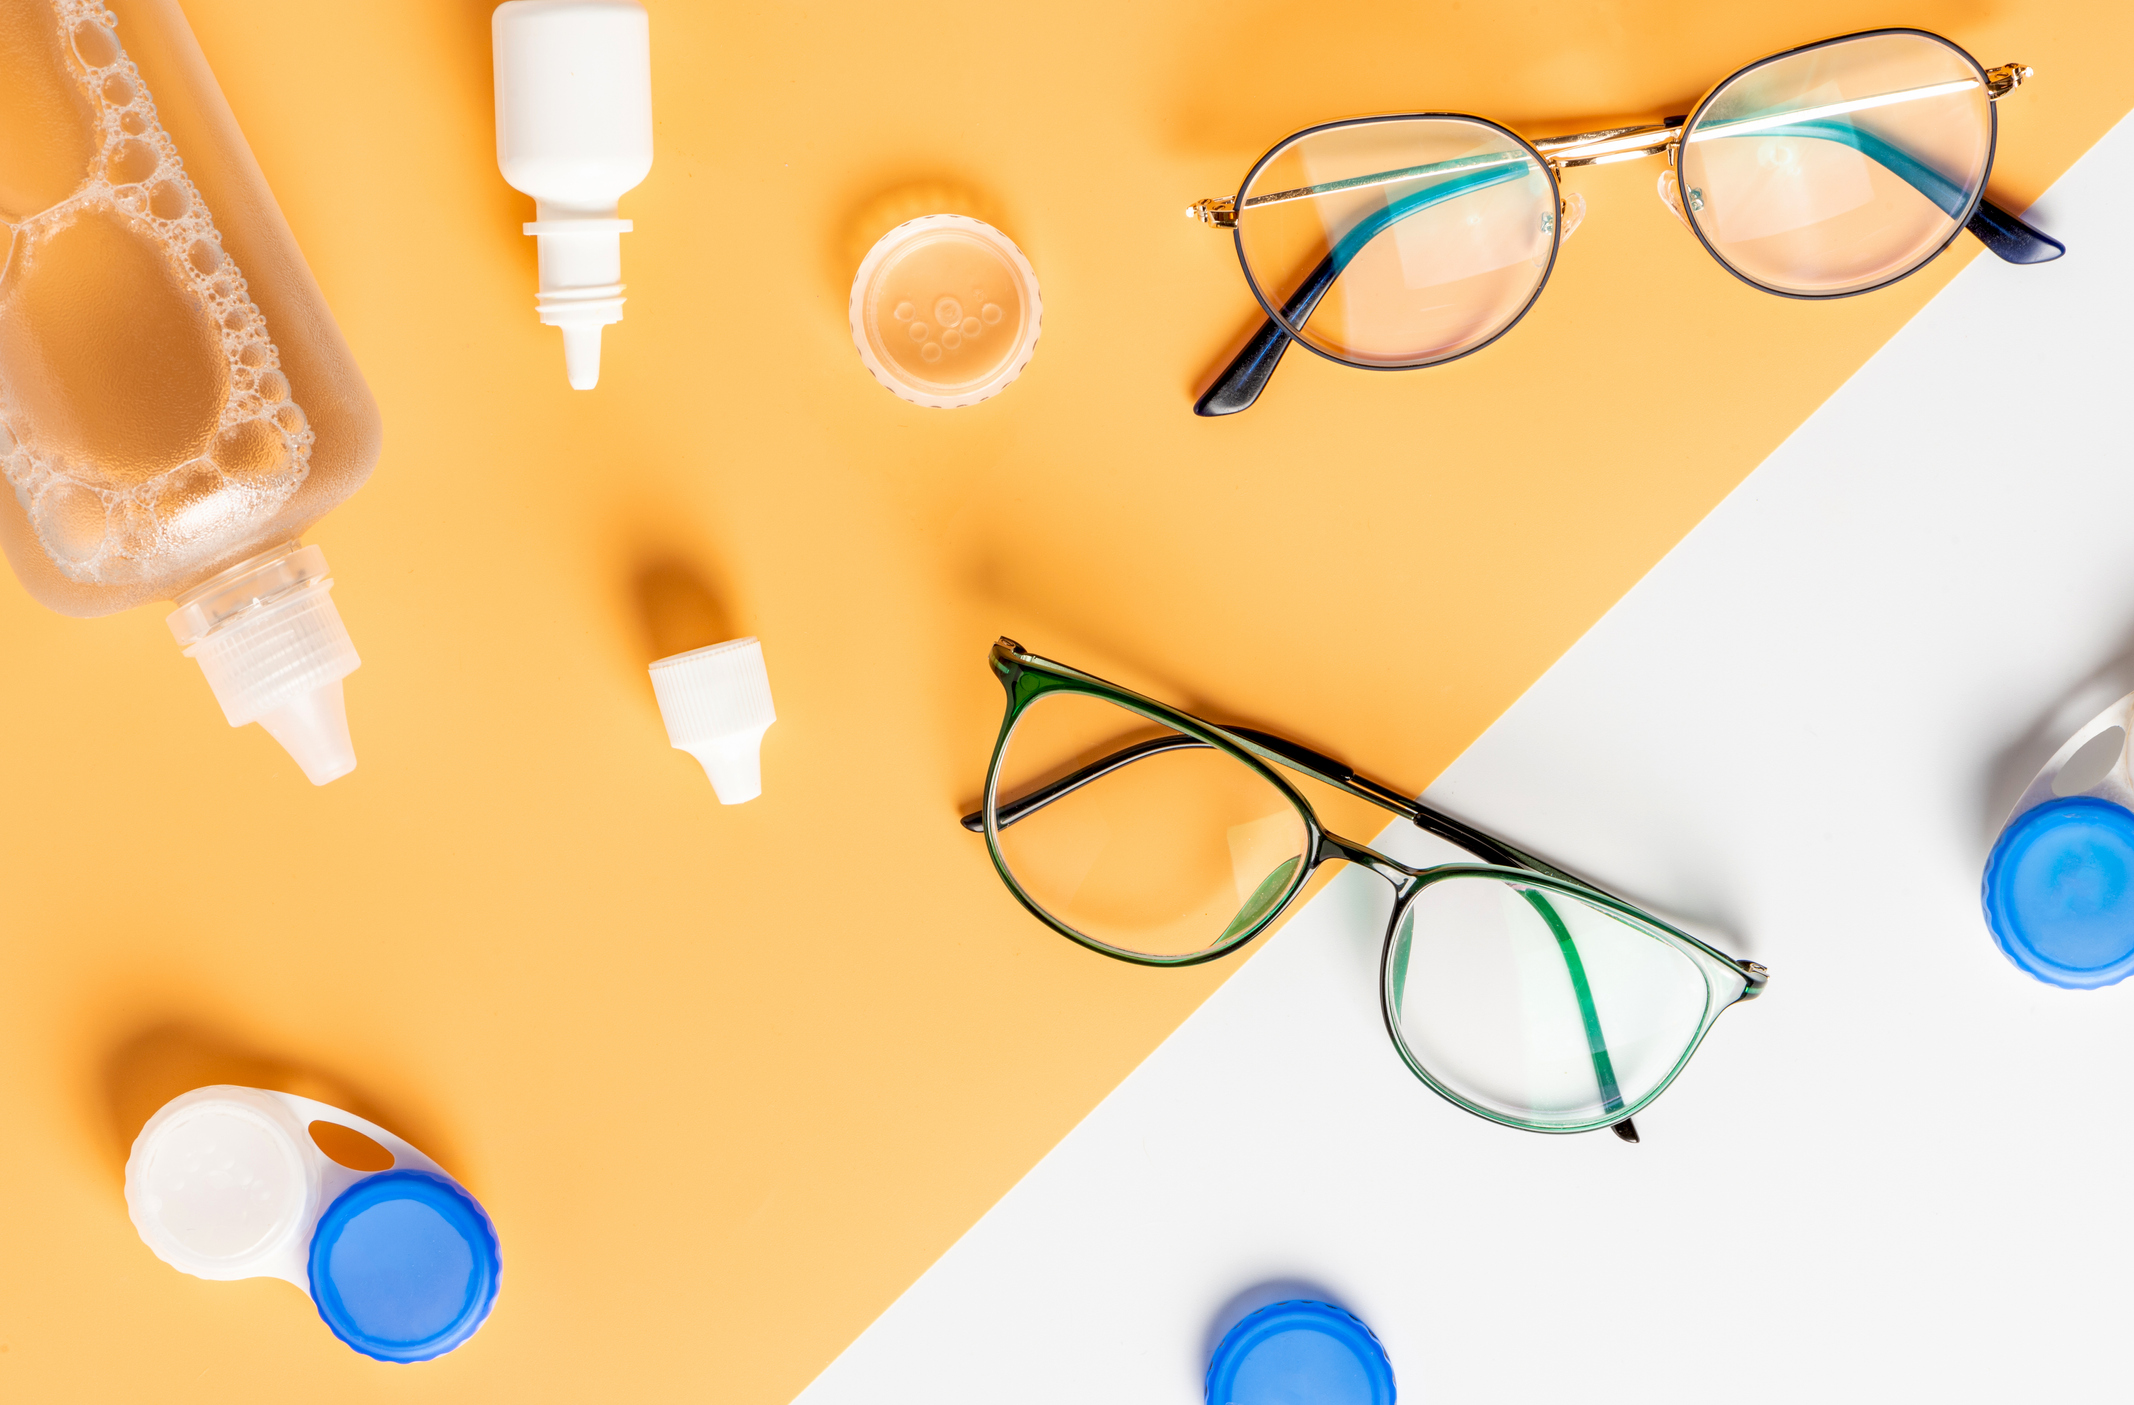 Optical glasses, contact lenses and eye drops